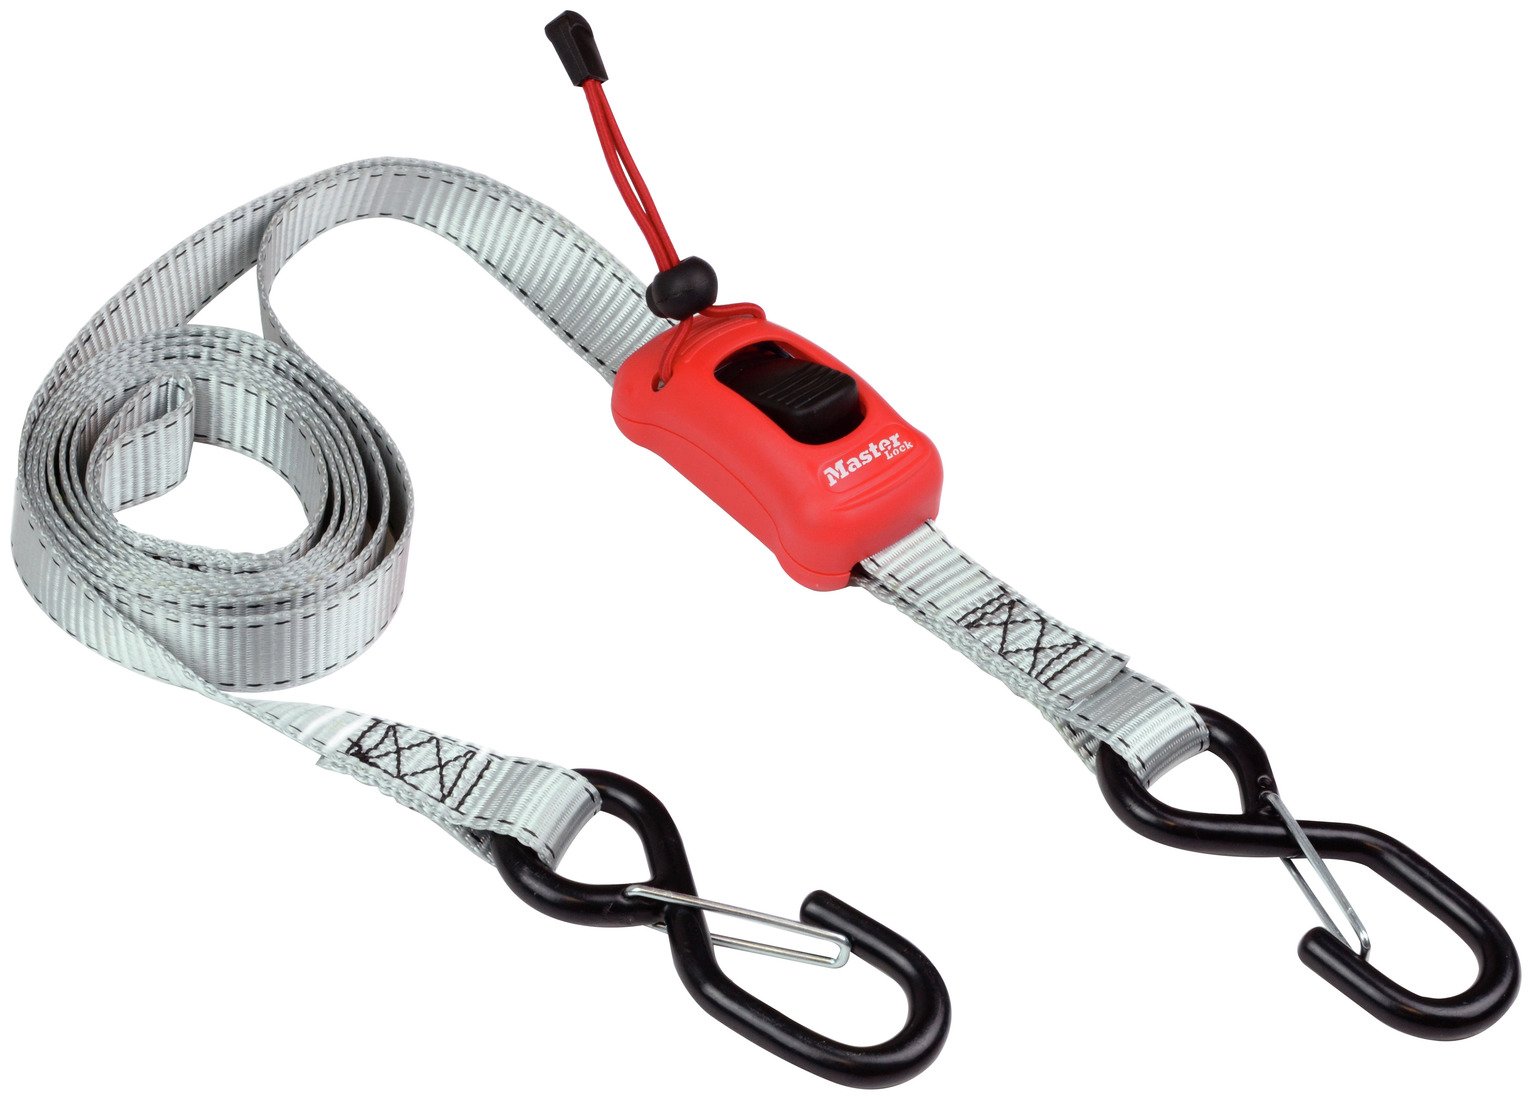 Master Lock Spring Clamp Tie Down review